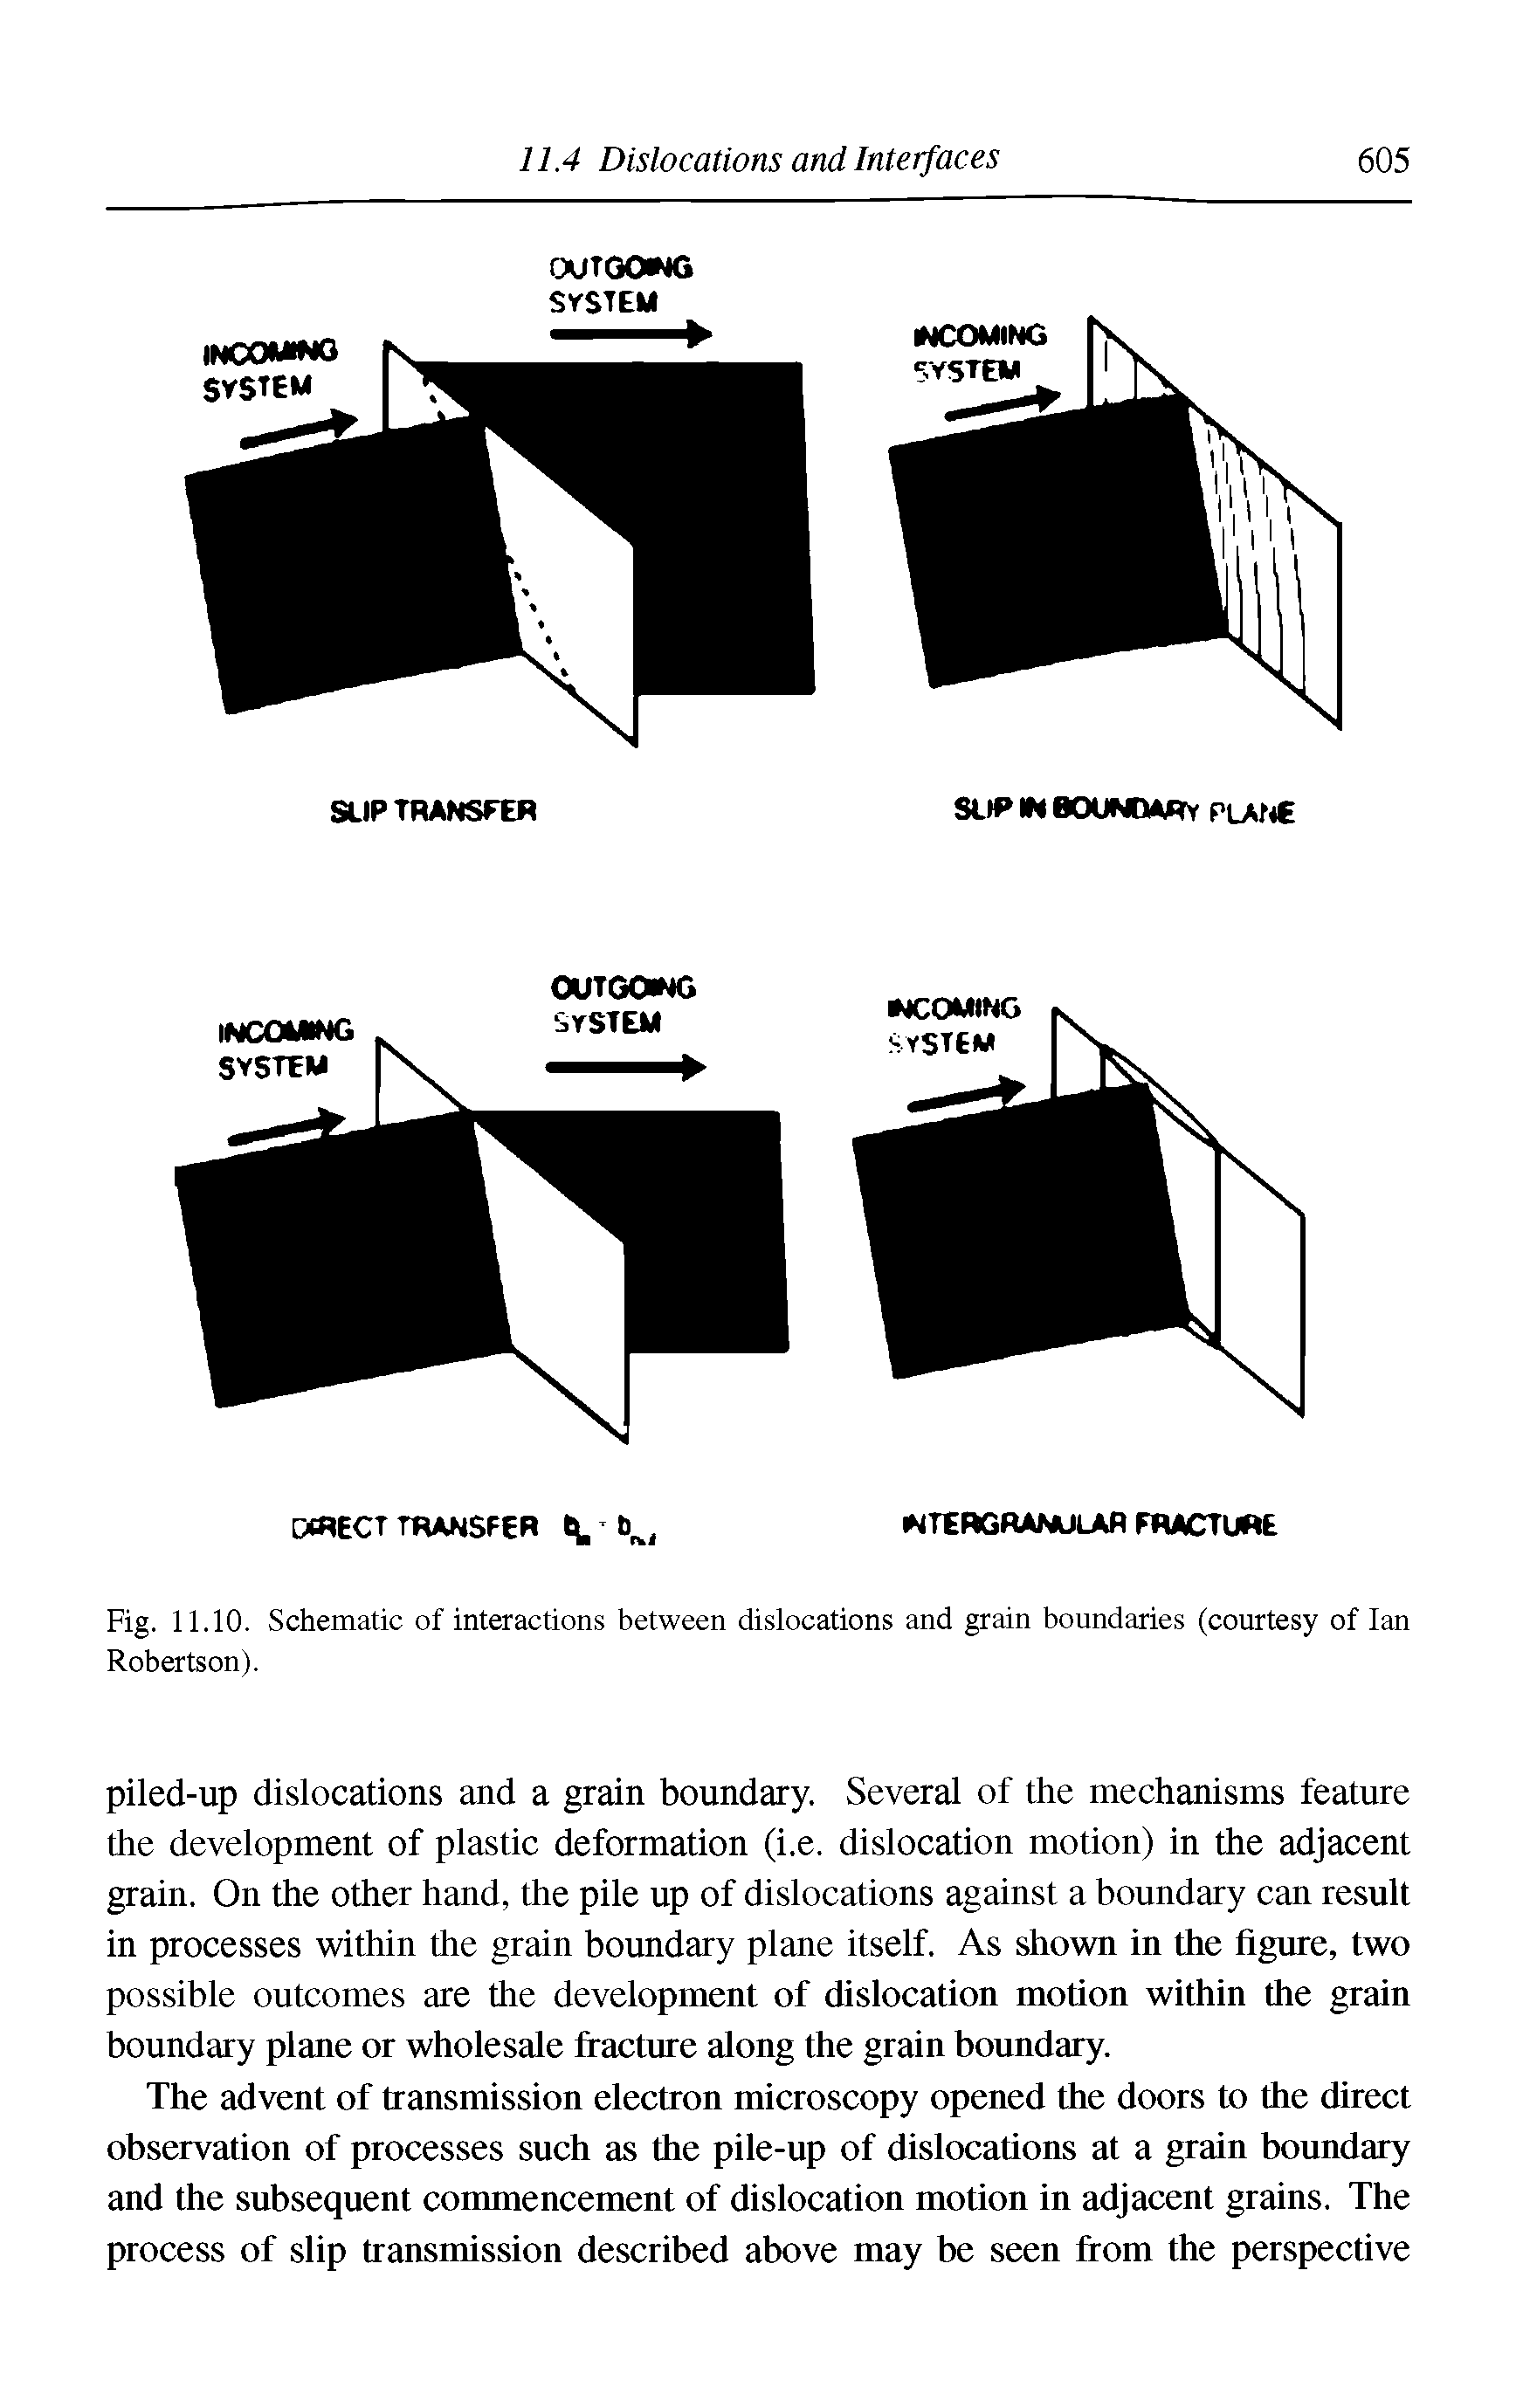 Fig. 11.10. Schematic of interactions between dislocations and grain boundaries (courtesy of Ian Robertson).